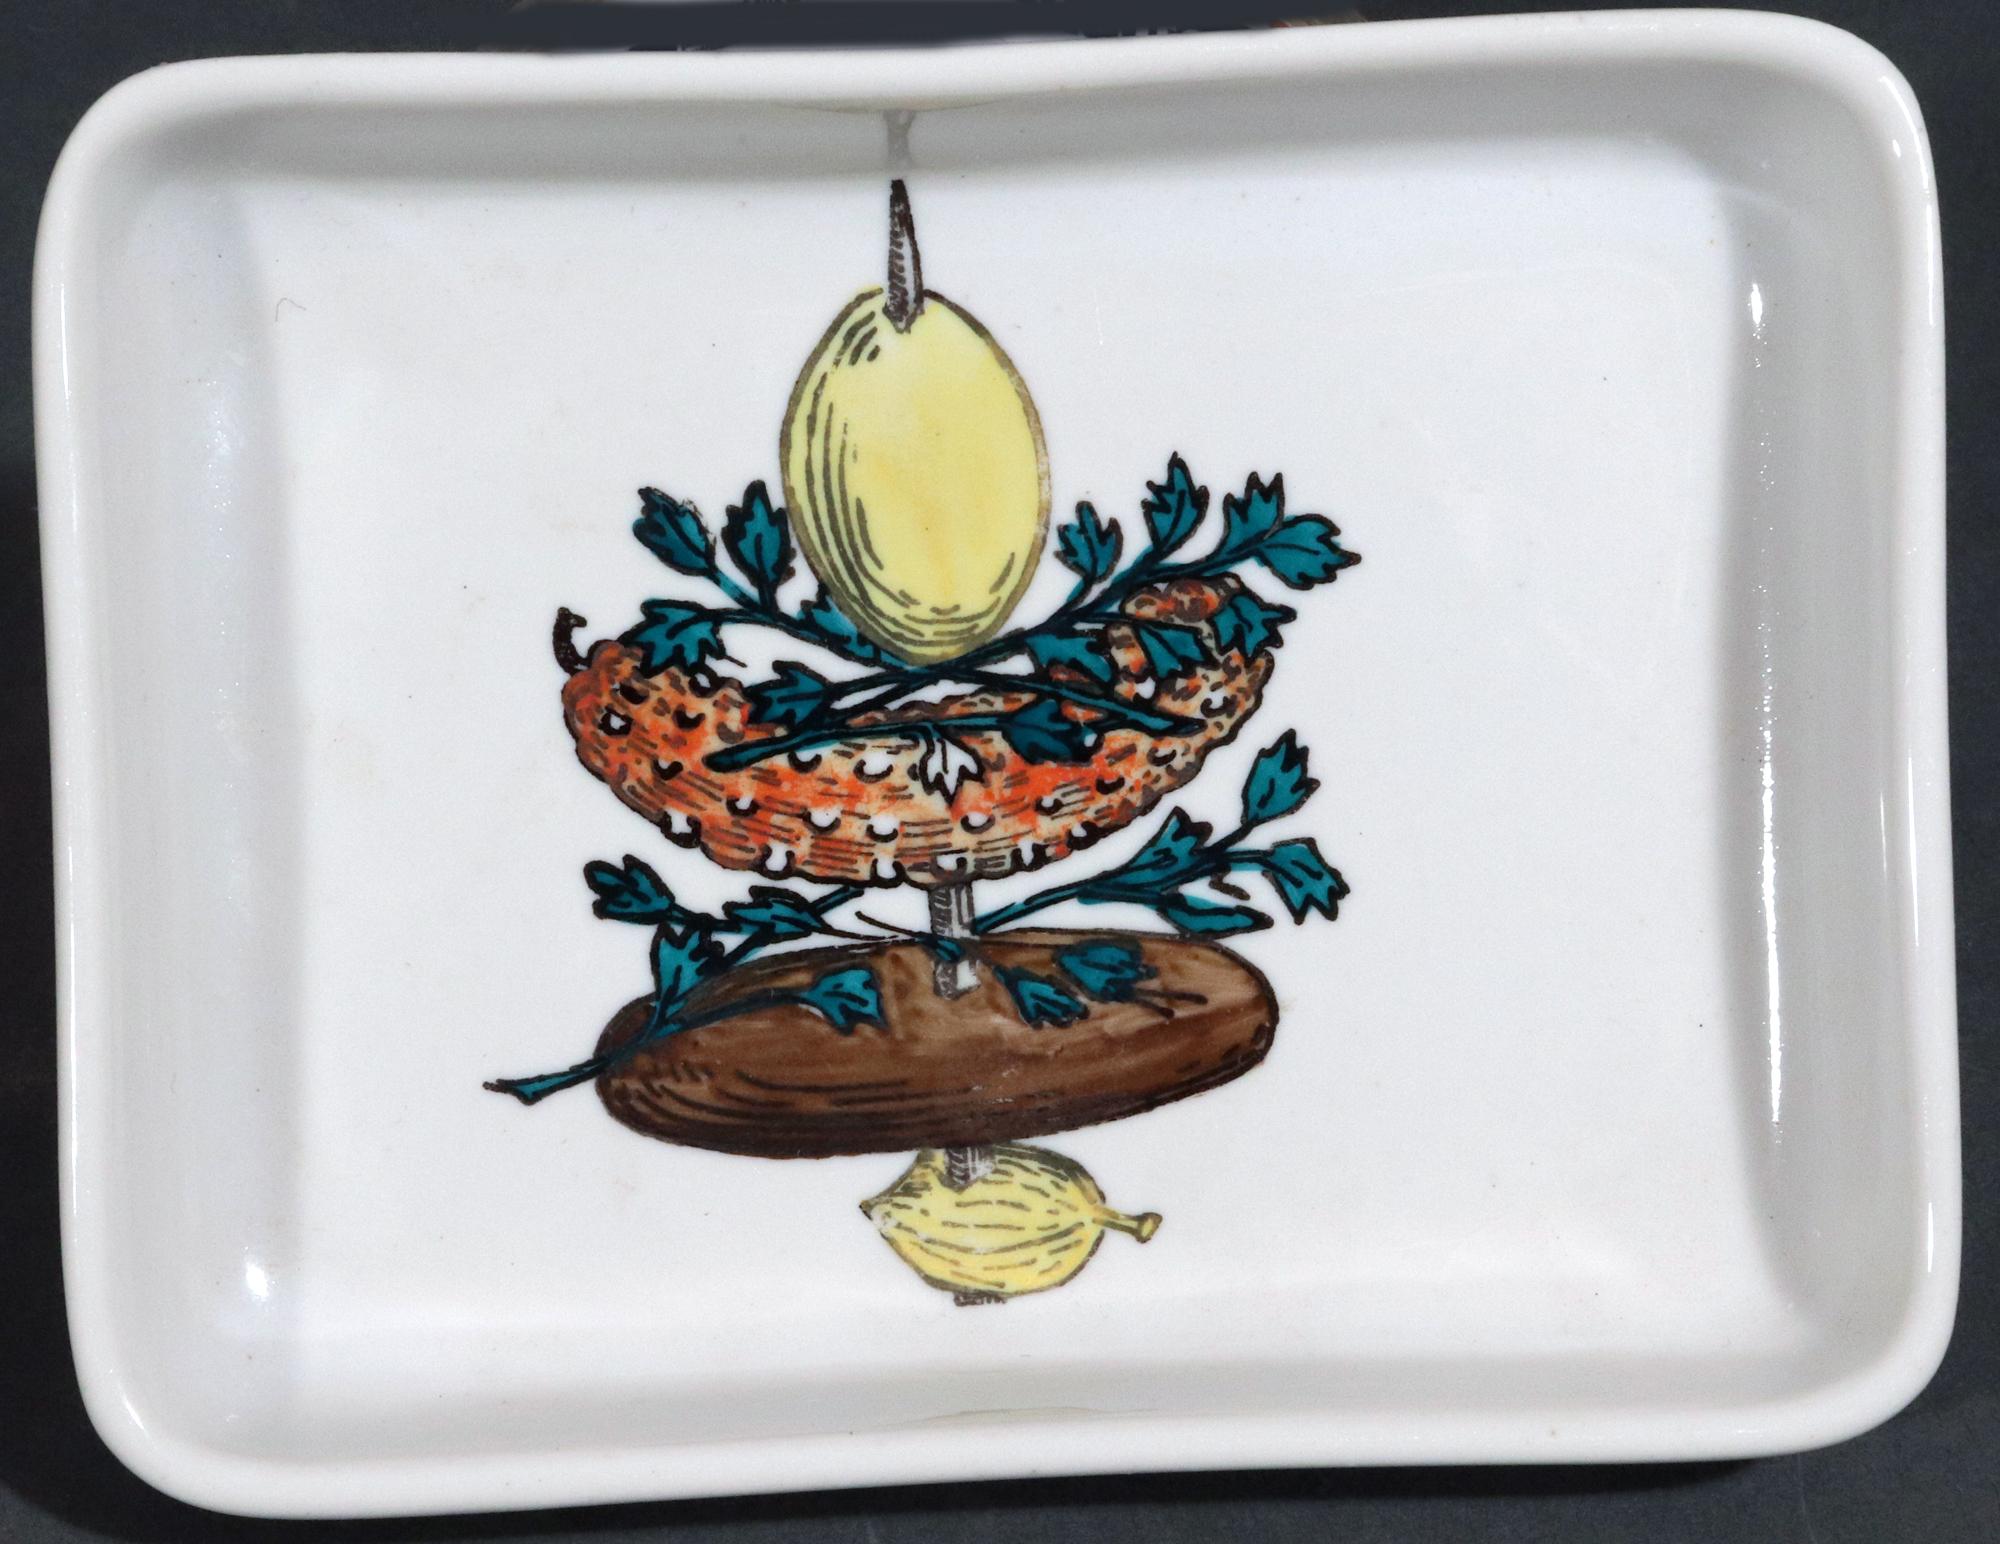 Mid-century Modern Piero Fornasetti Ceramic Appetizer Fish Kebab Dishes and Tray For Sale 2